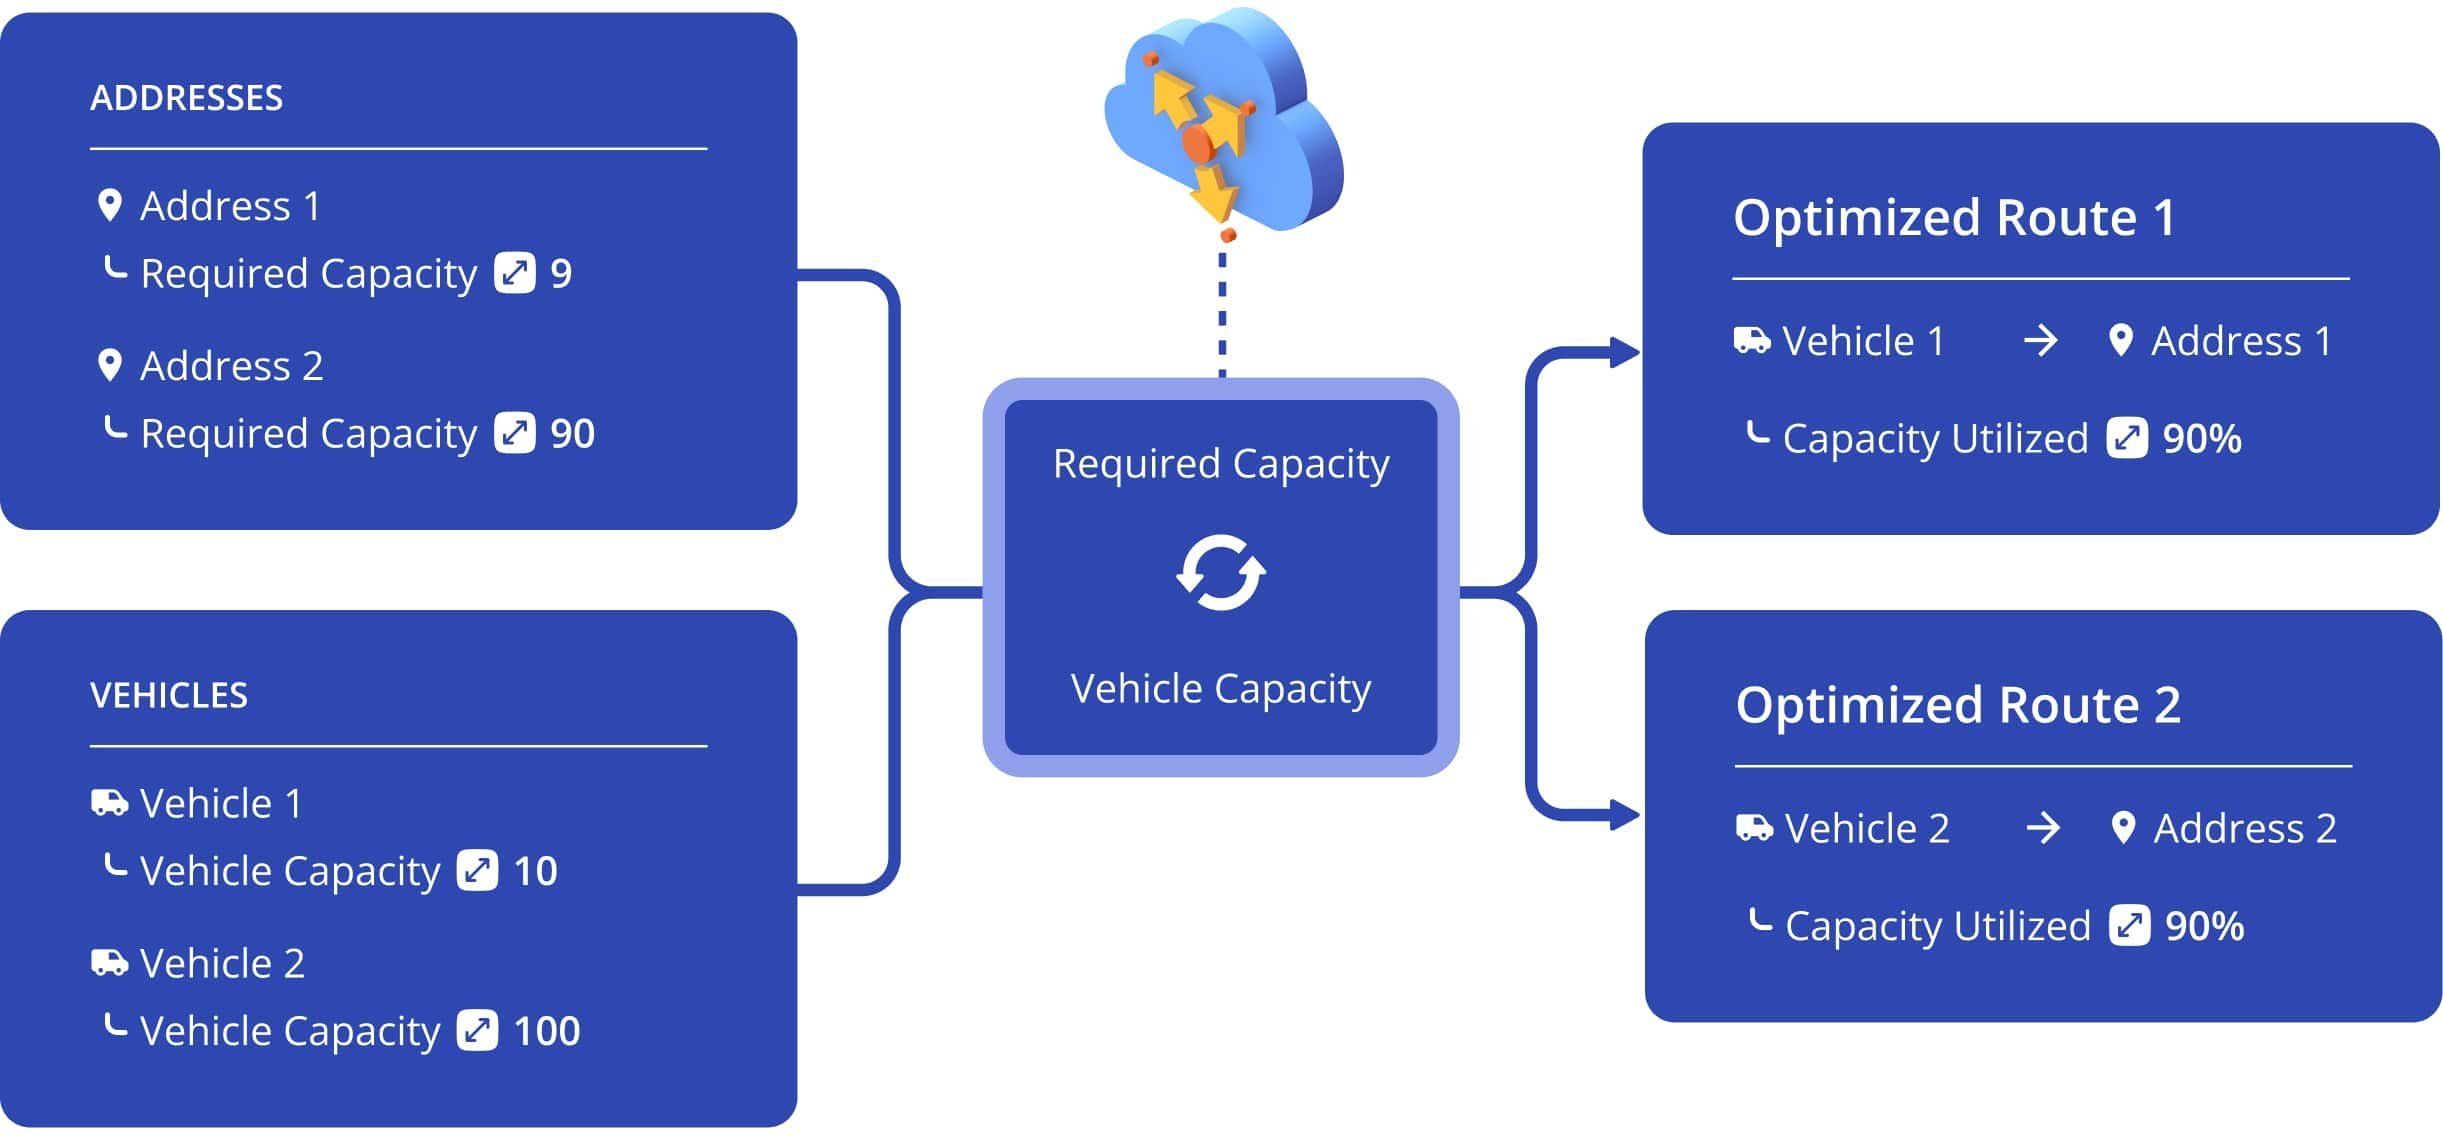 Route4Me matches the required capacity for every delivery or pickup address with the available dynamic capacity of your mixed vehicle fleet and plans the most optimal dynamic capacity routes.